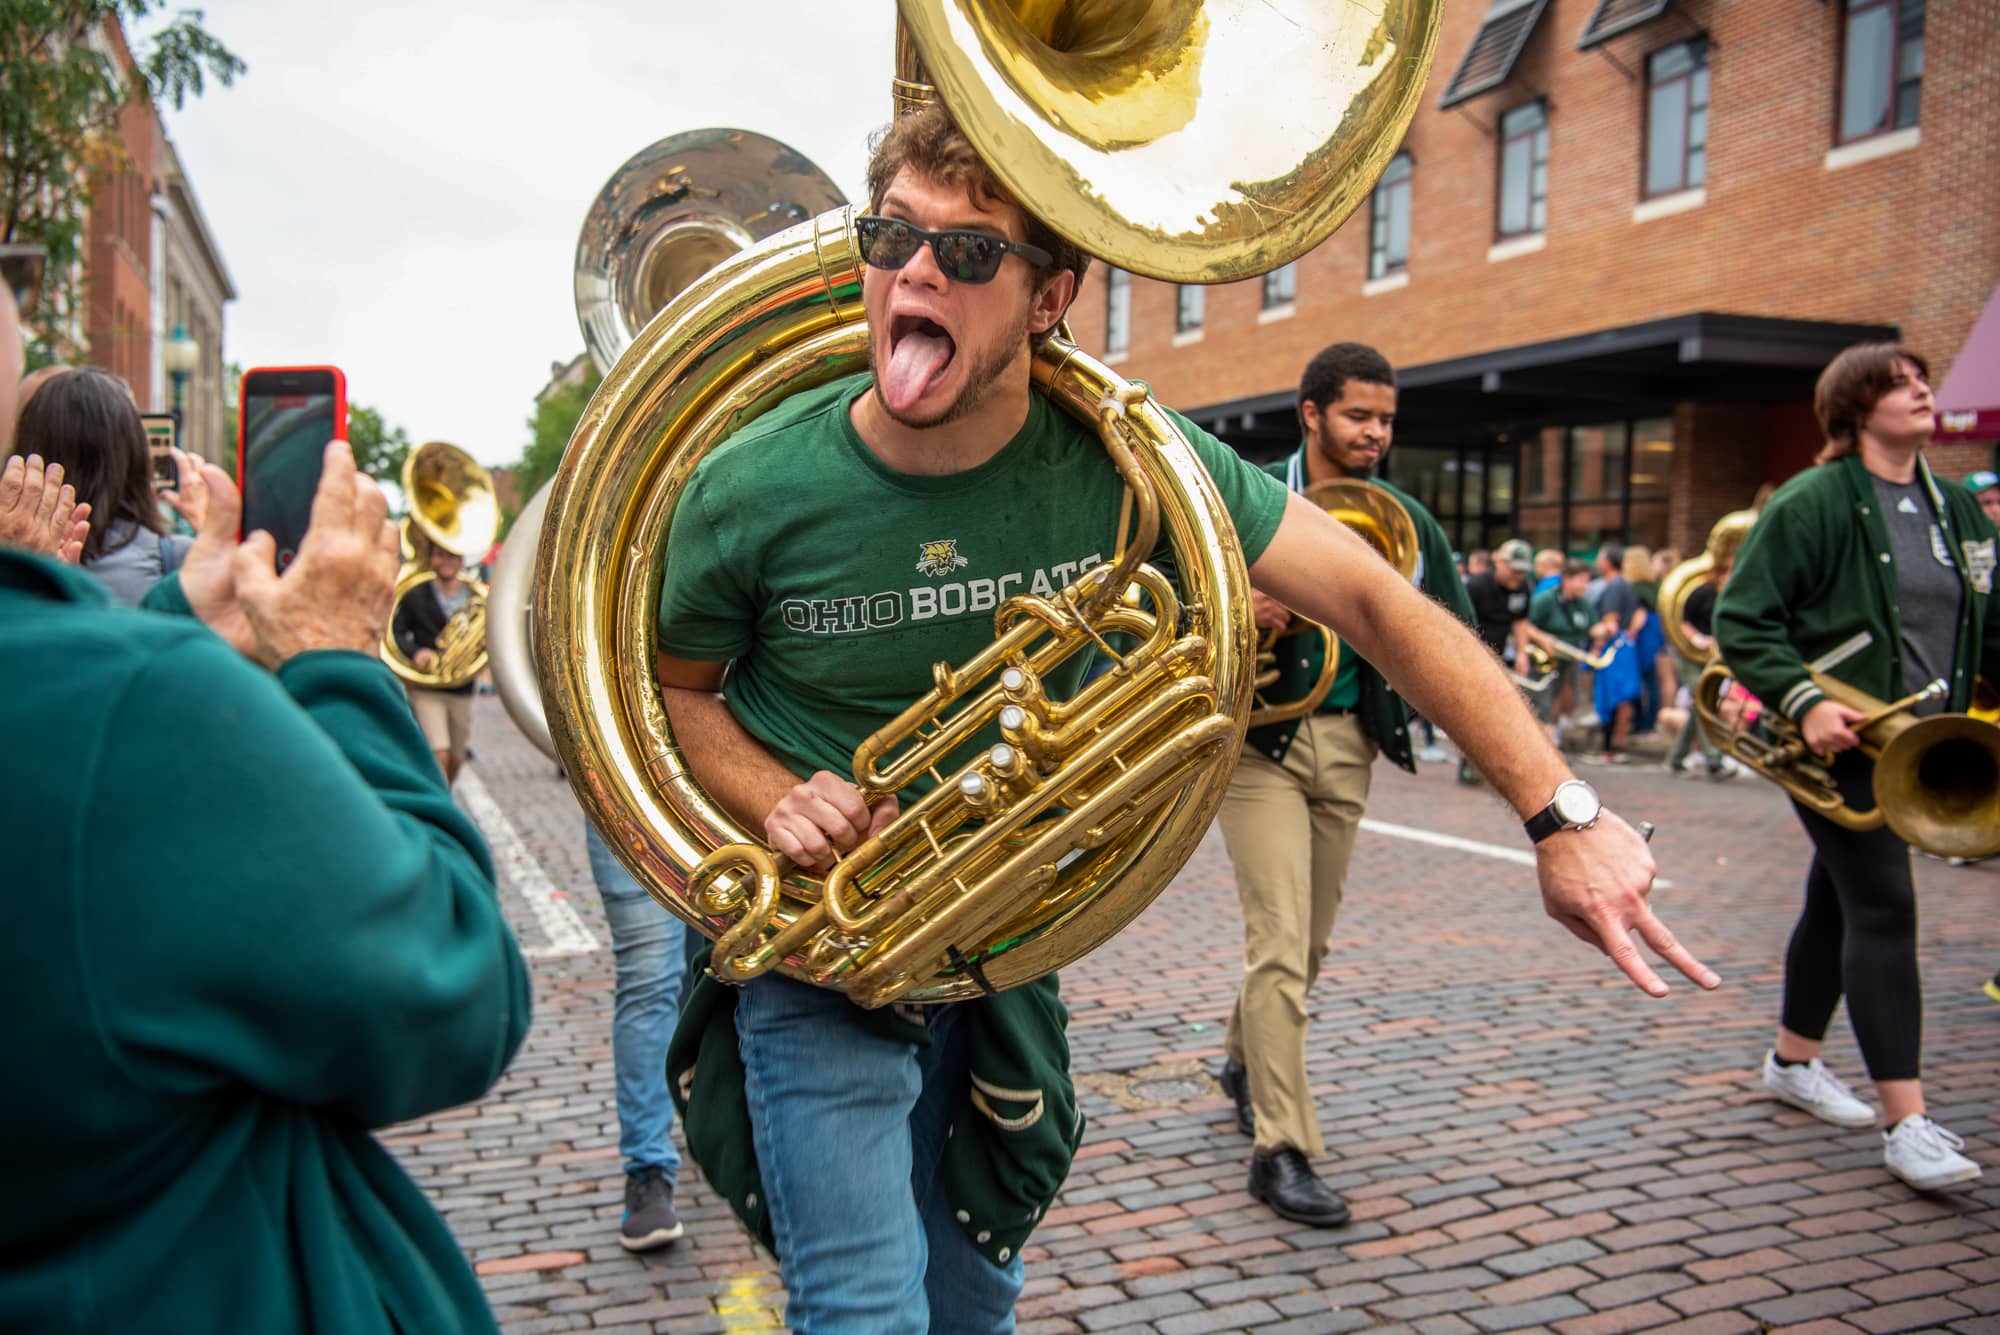 Tuba player in the Ohio University homecoming parade 2021